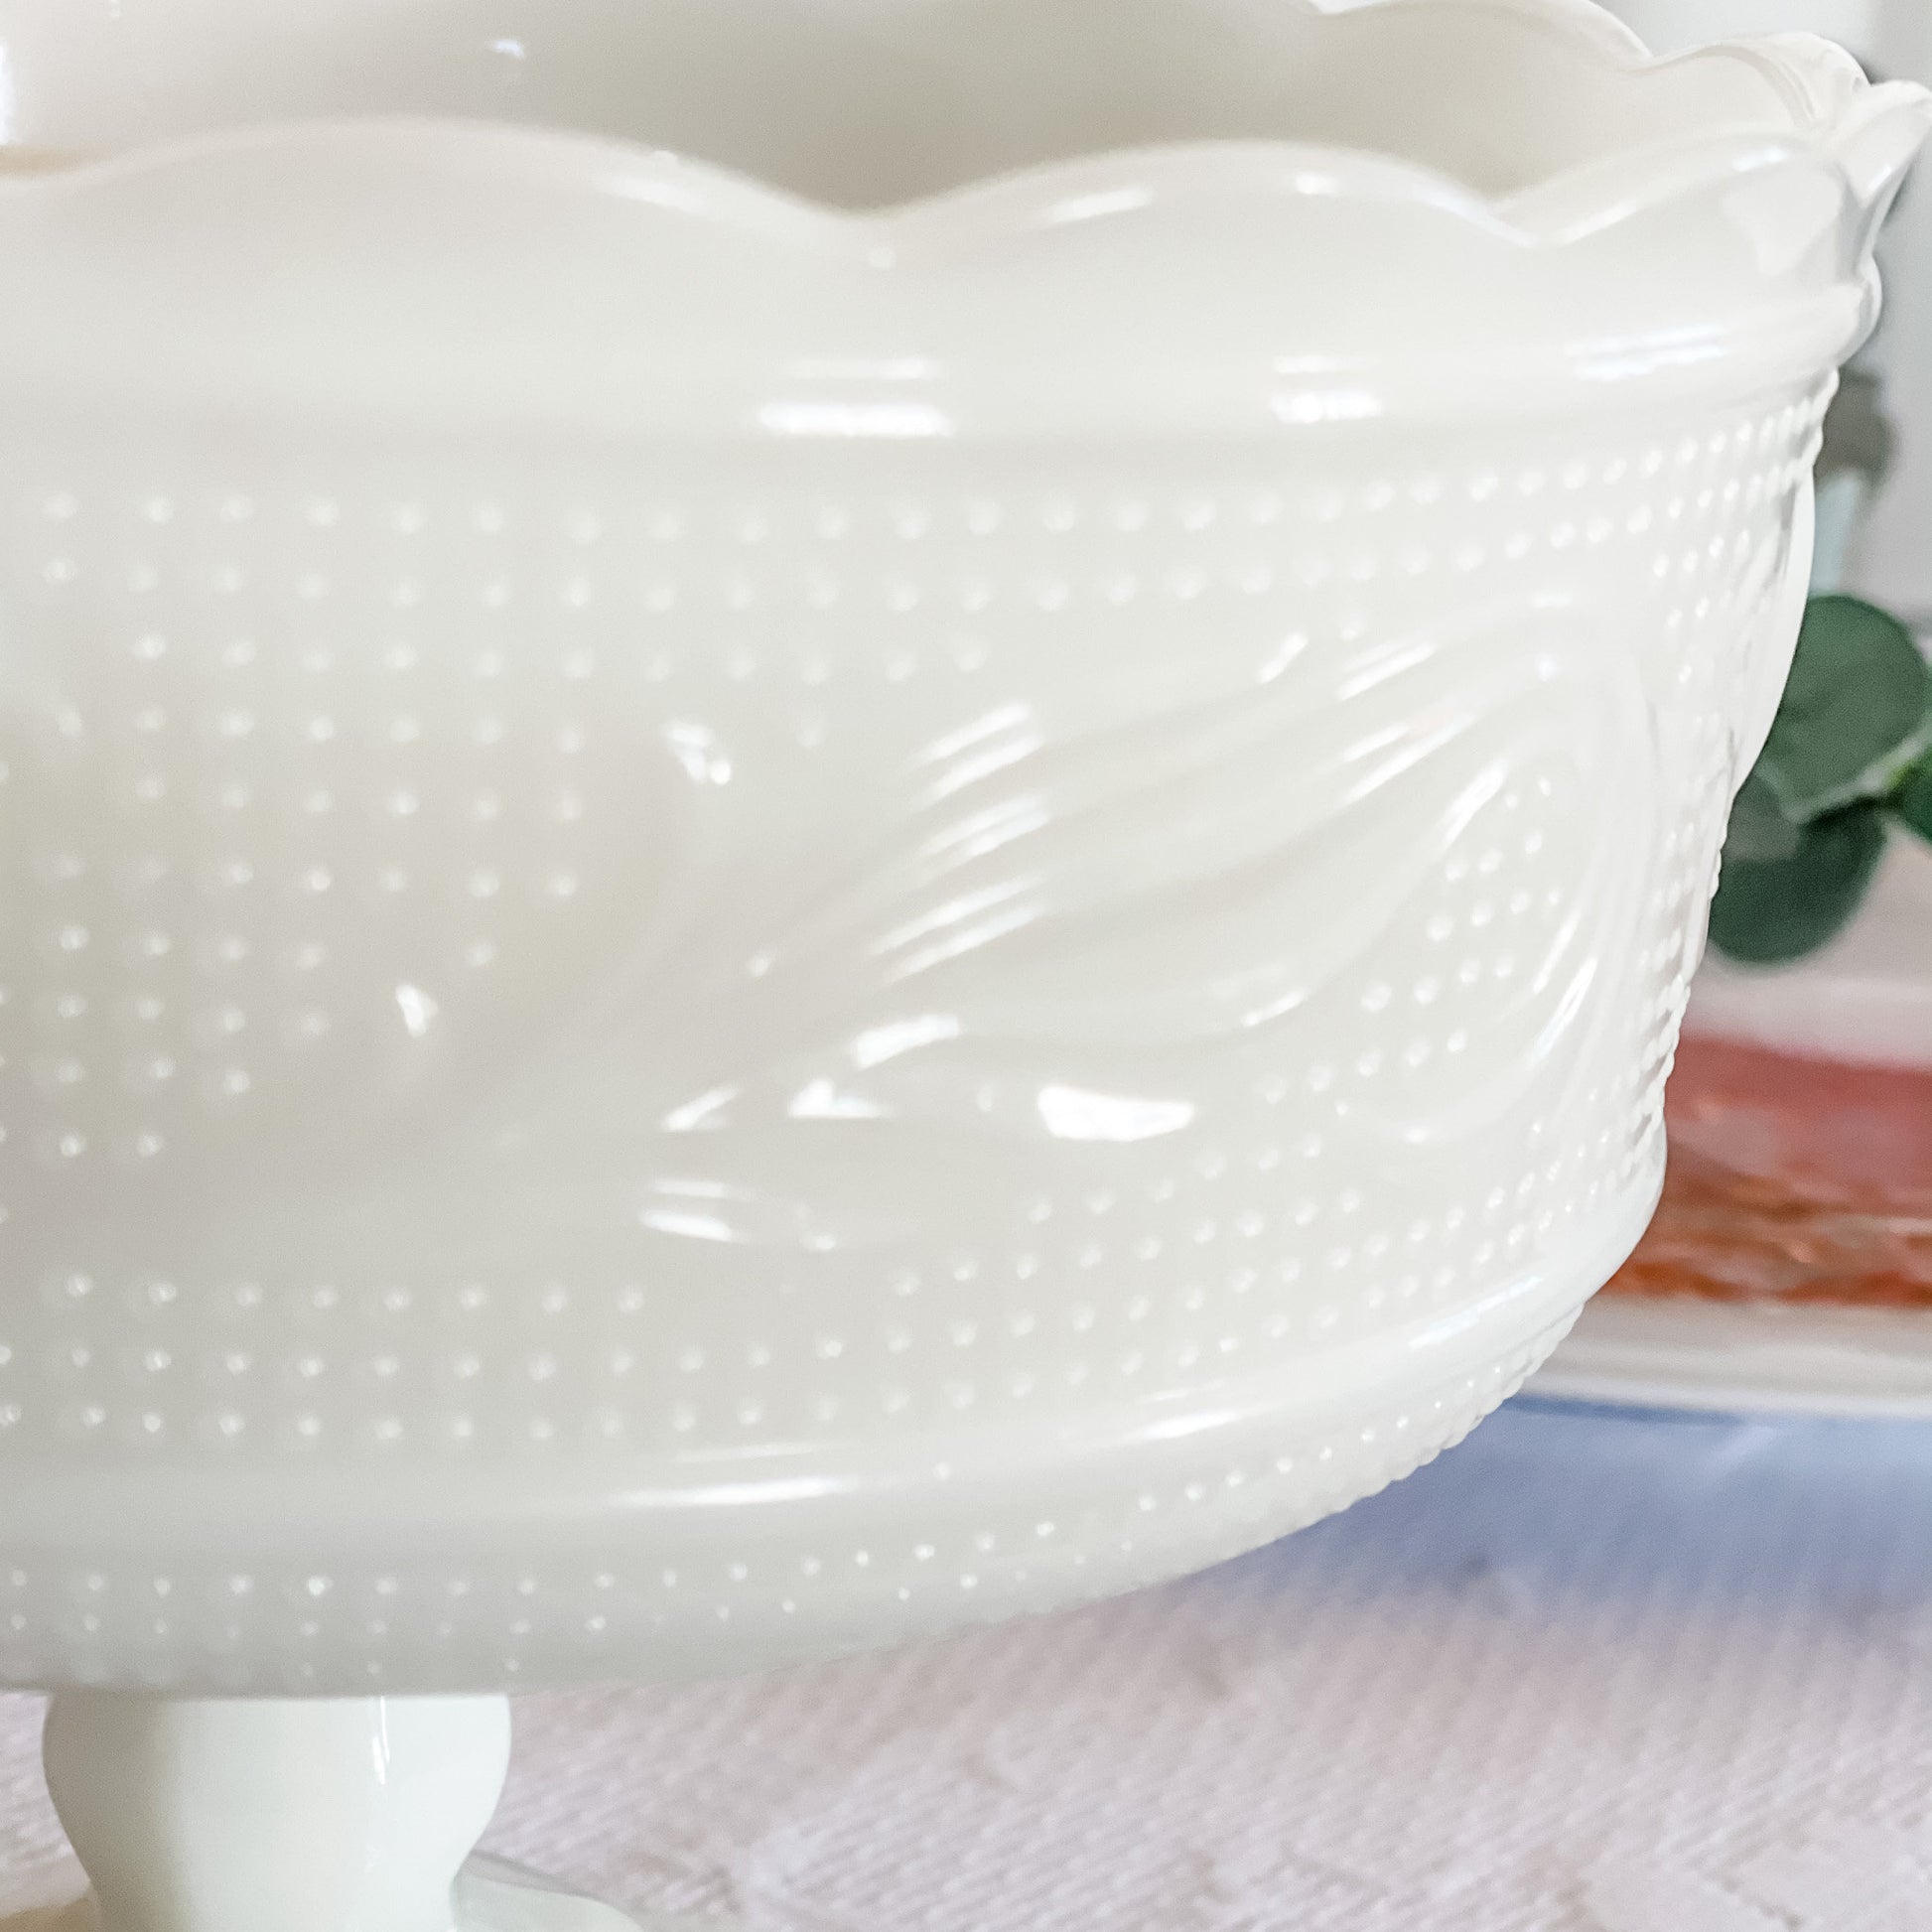 Scented Candle in Vintage Milk Glass Fruit Bowl